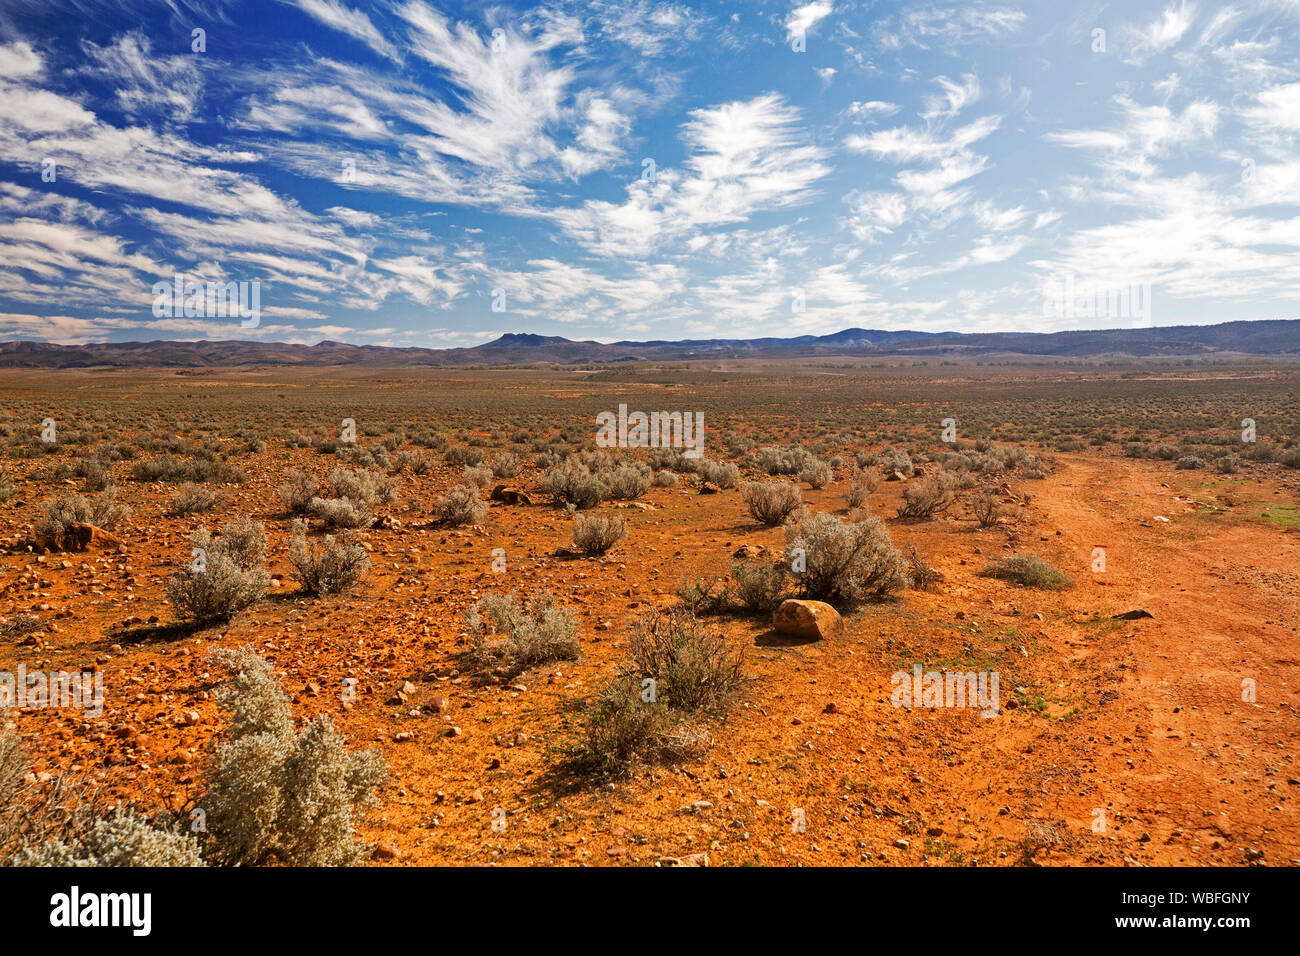 Arid stony outback landscape of Flinders Ranges region with low hills on horizon rising into blue sky freckled with clouds in South Australia Stock Photo